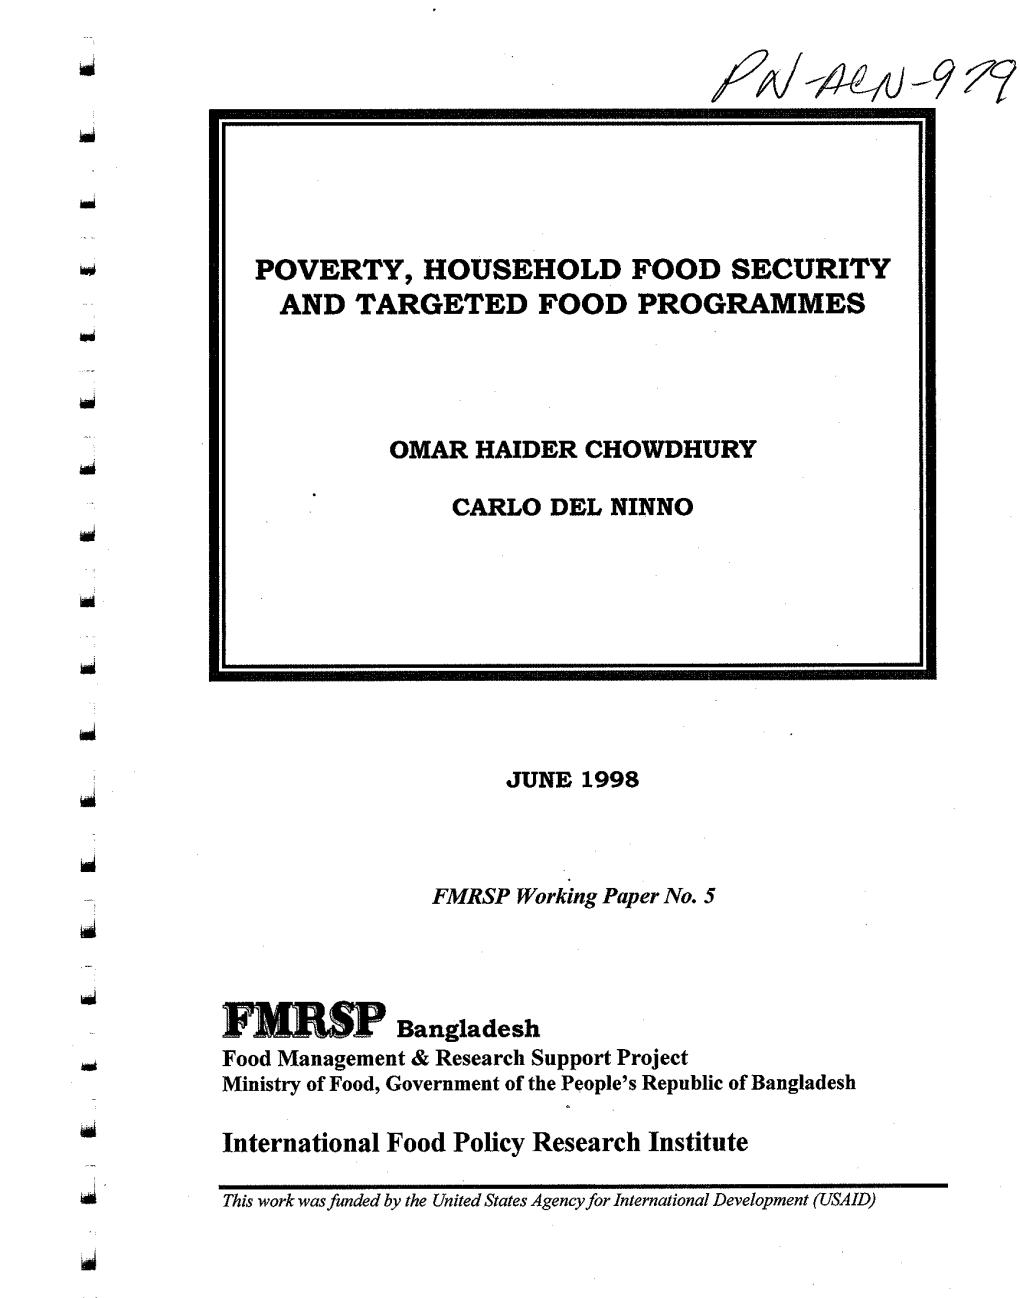 Poverty, Household Food Security and Targeted Food Programmes